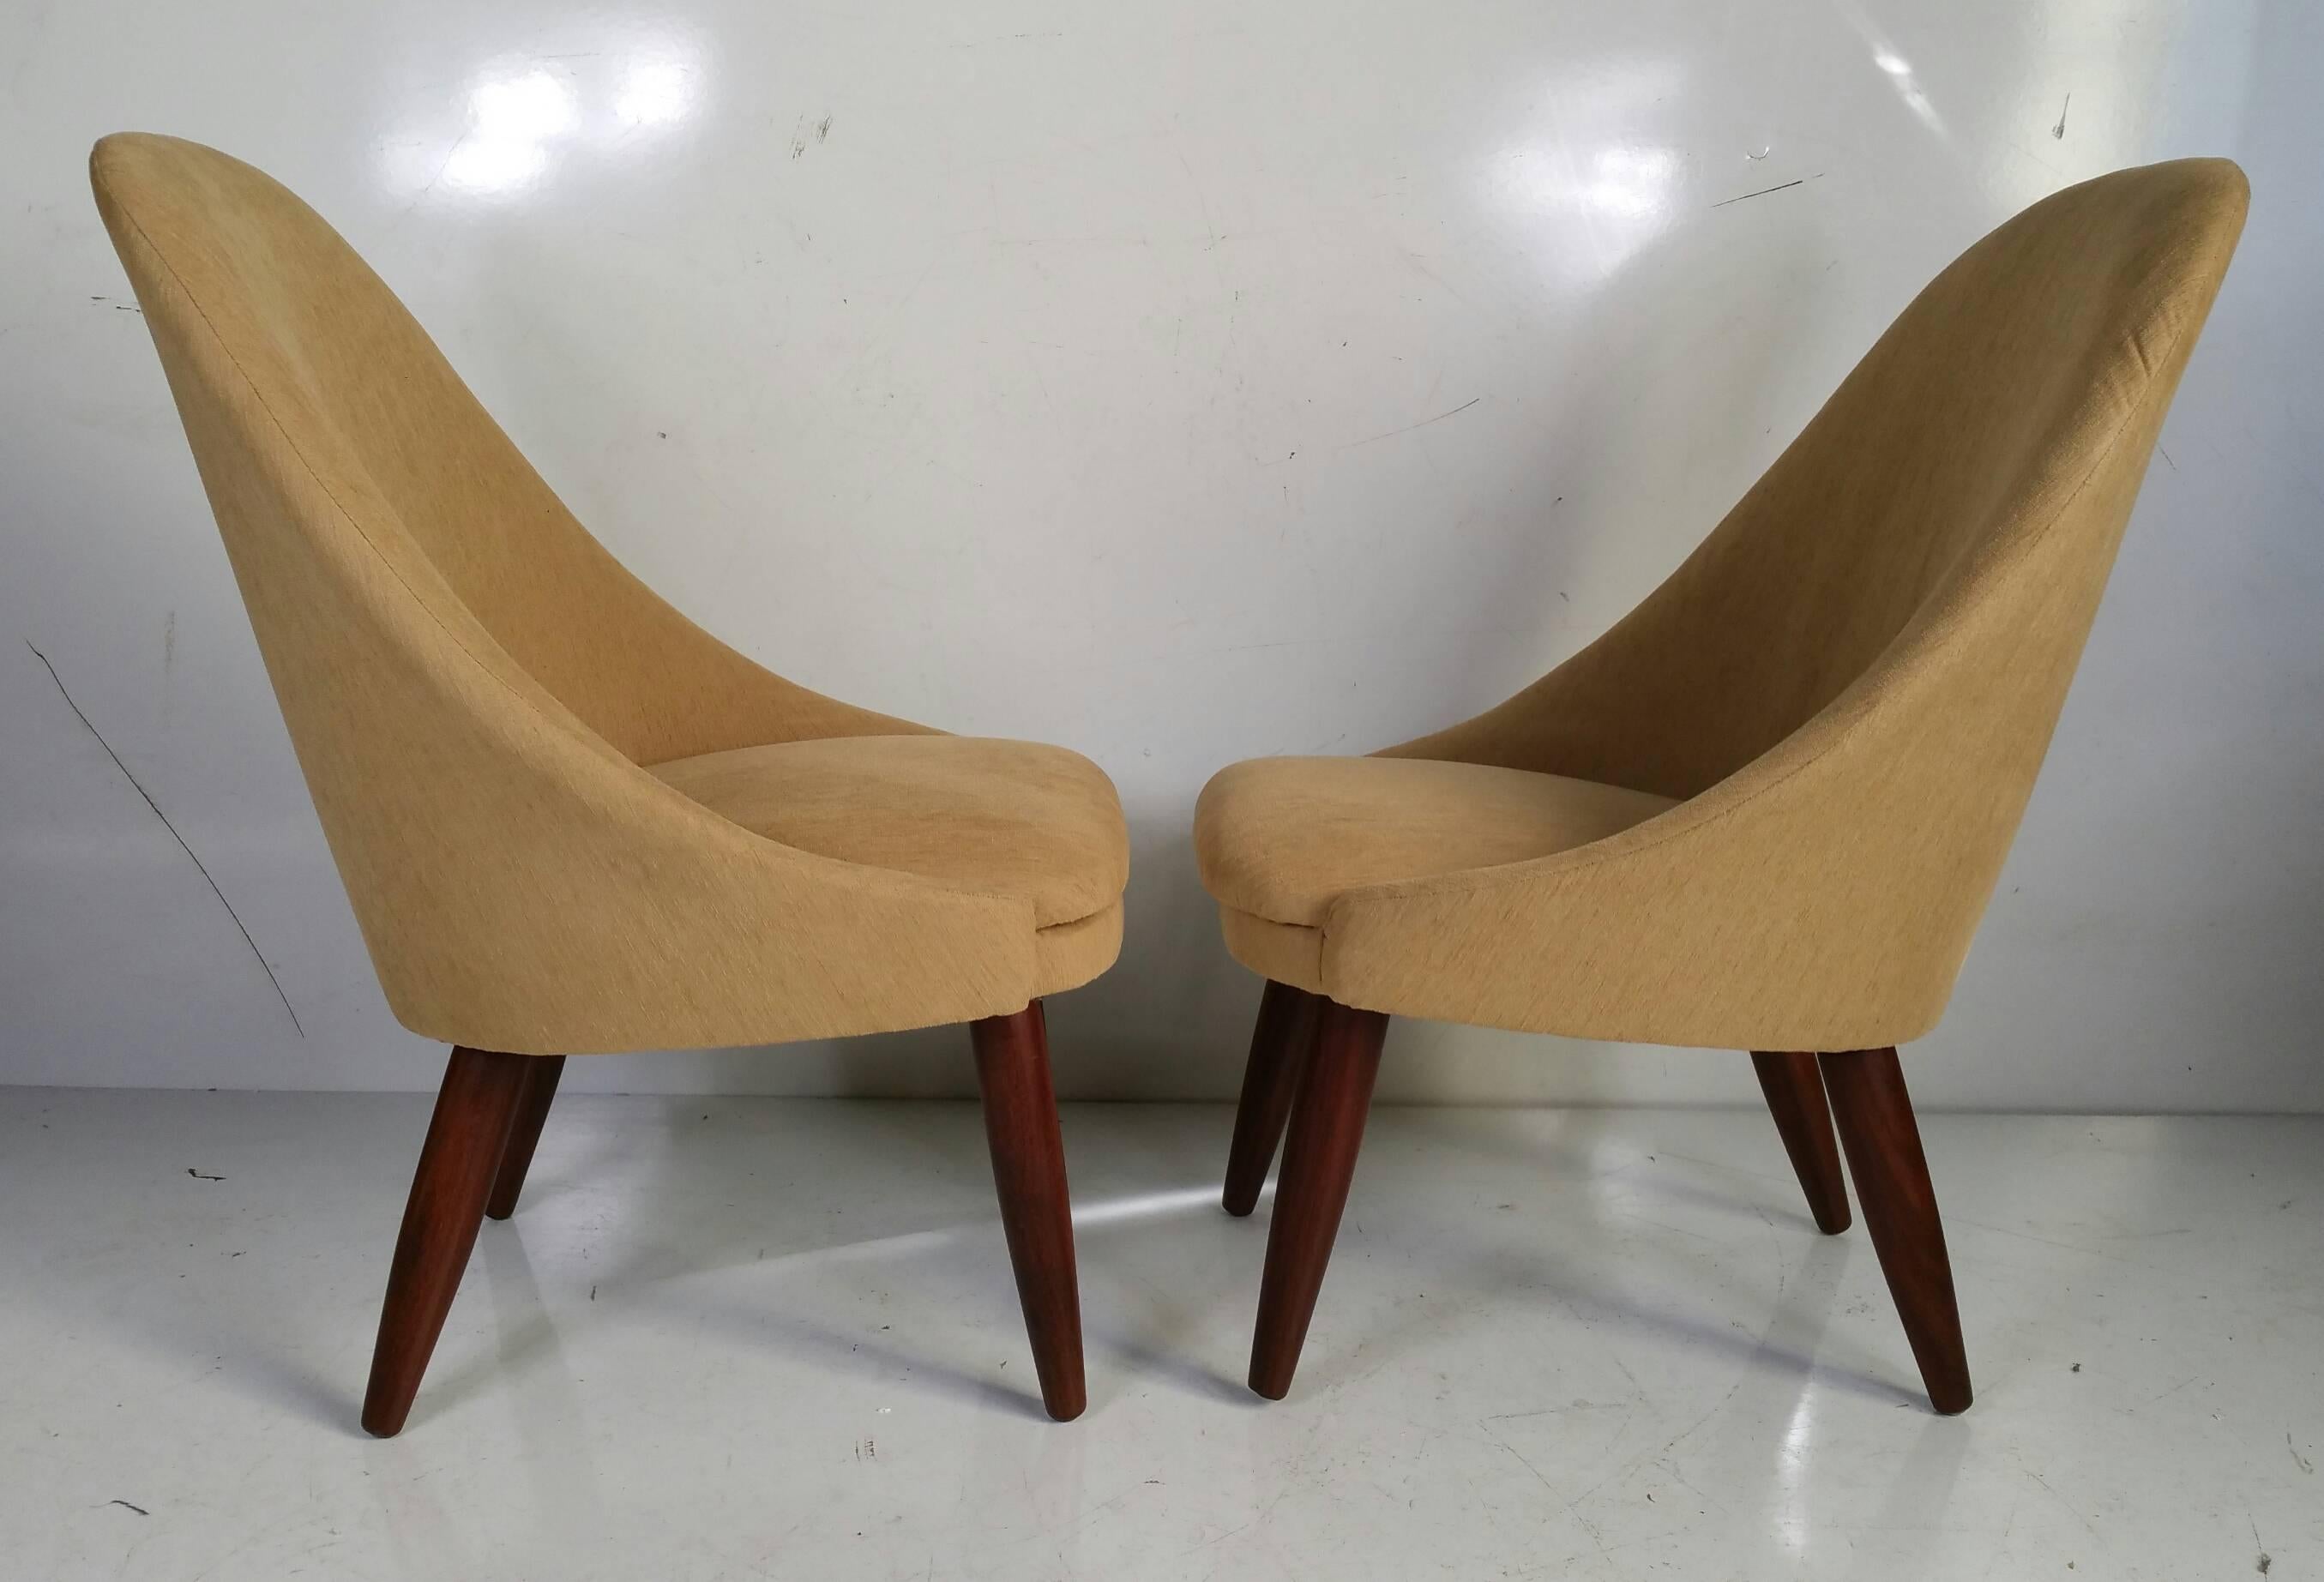 Upholstery Pair of Danish Slipper Chairs by Ejvind Johansson